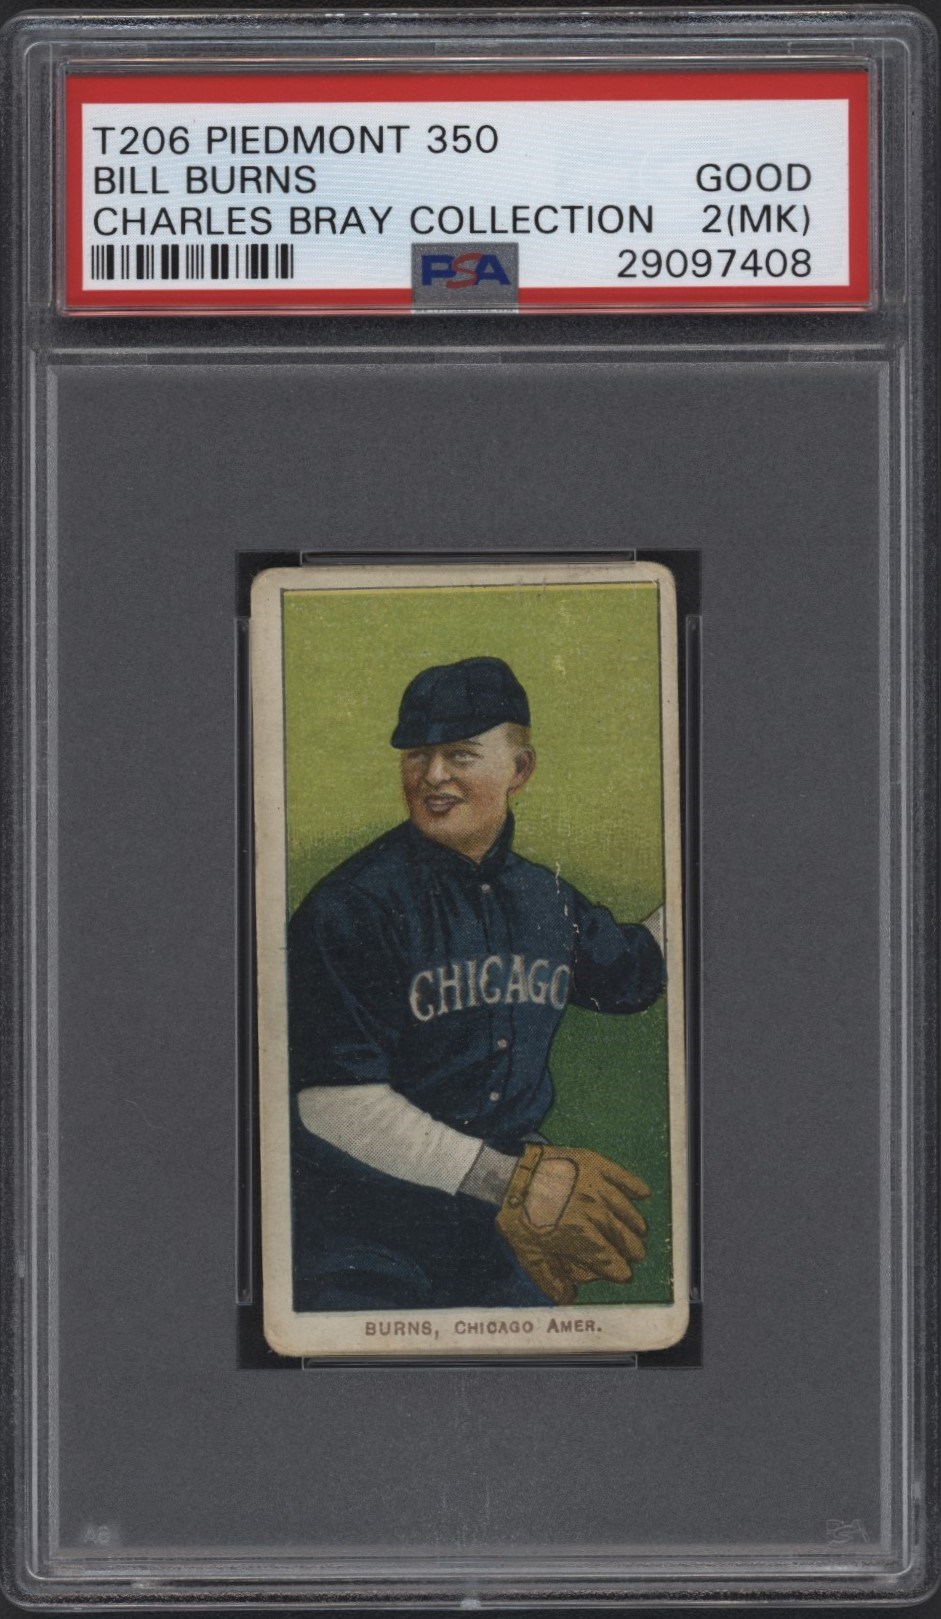 T206 Piedmont 350 Bill Burns PSA 2 From the Charles Bray Collection